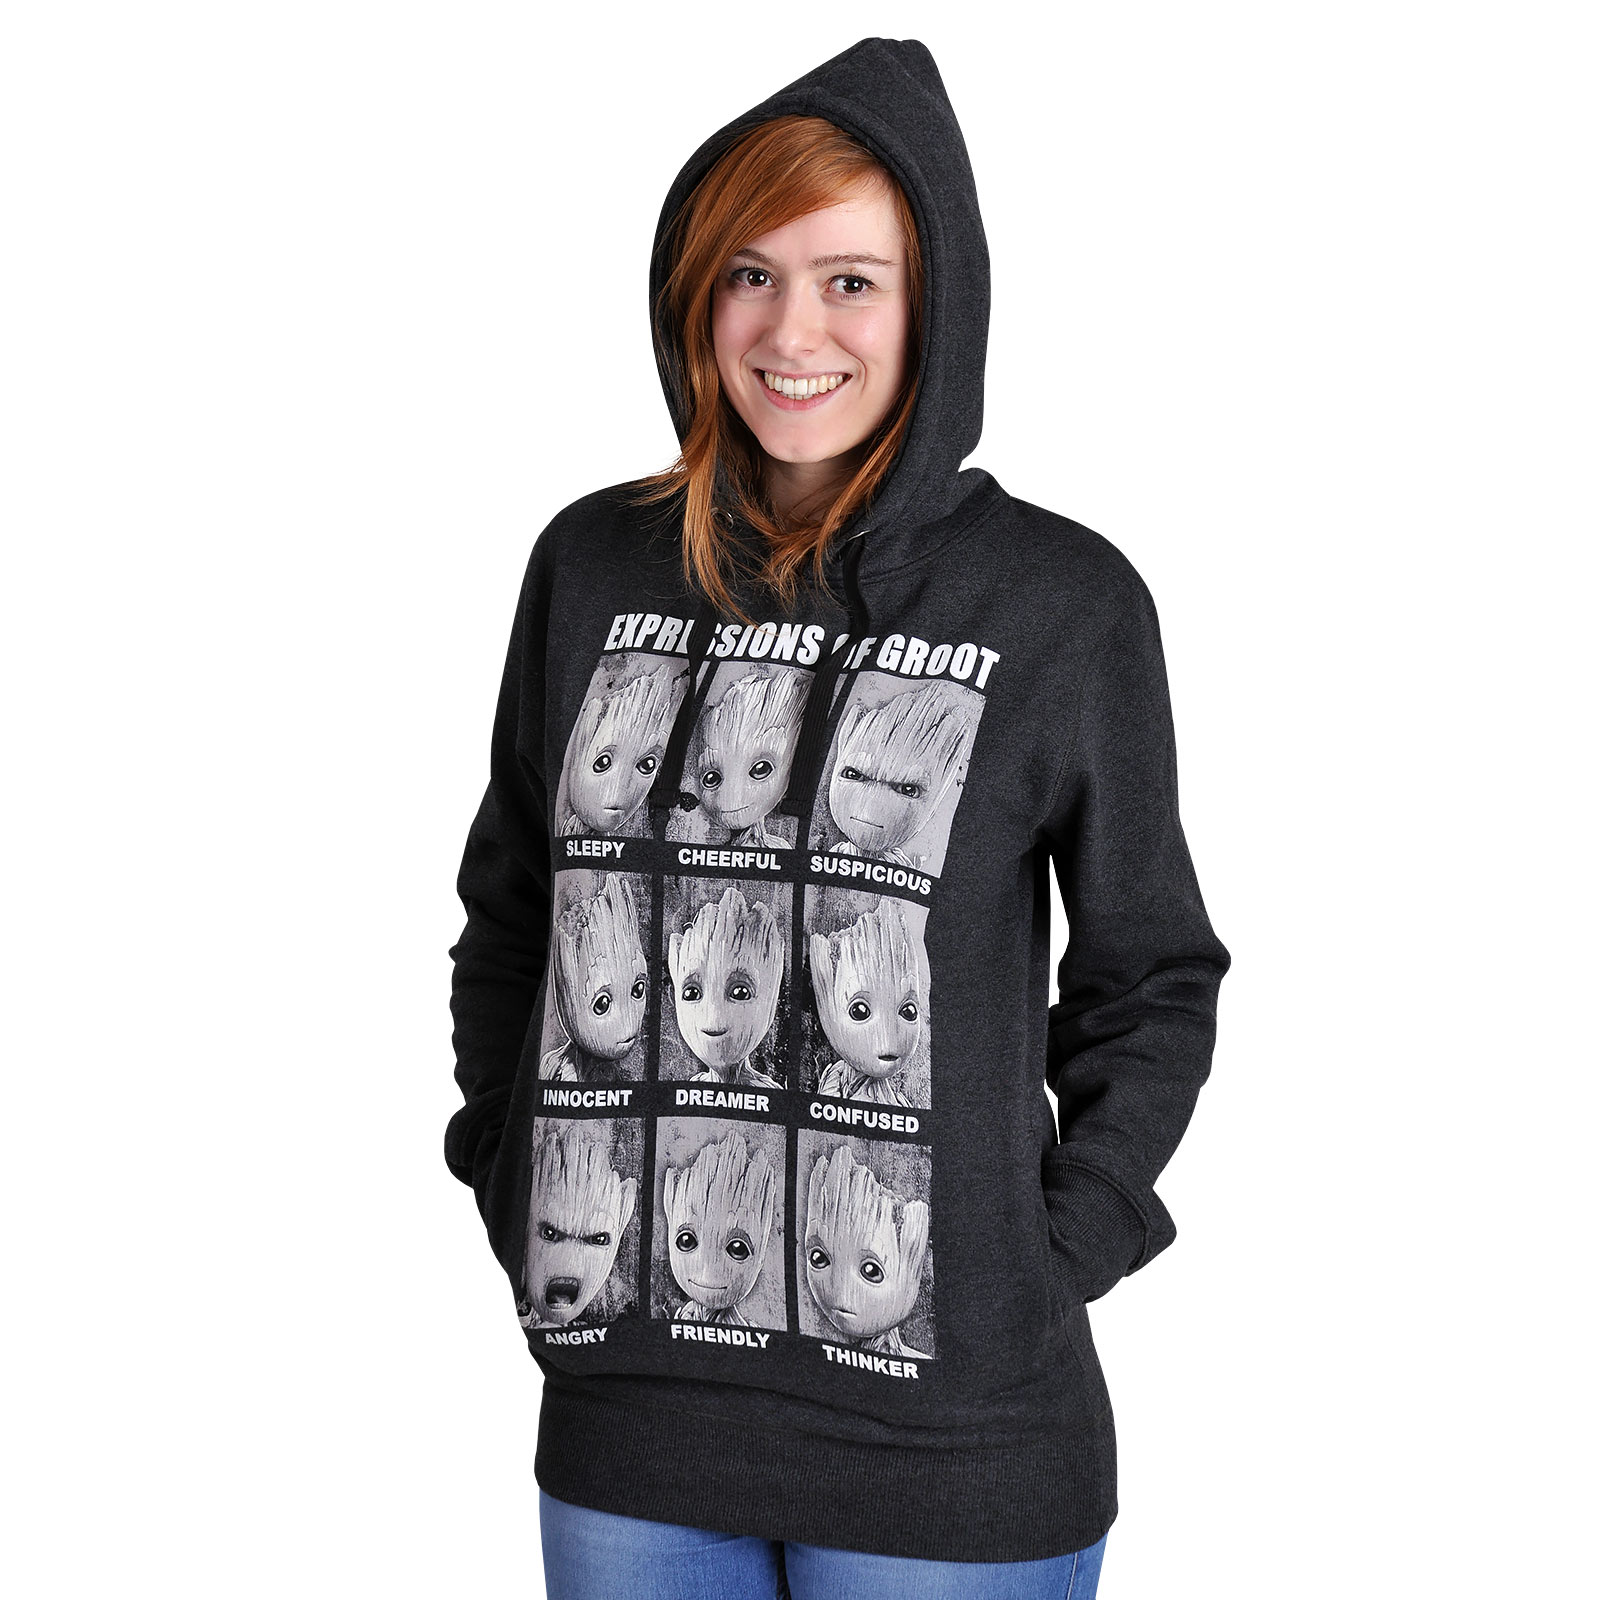 Guardians of the Galaxy - Groot Expressions Hoodie grau